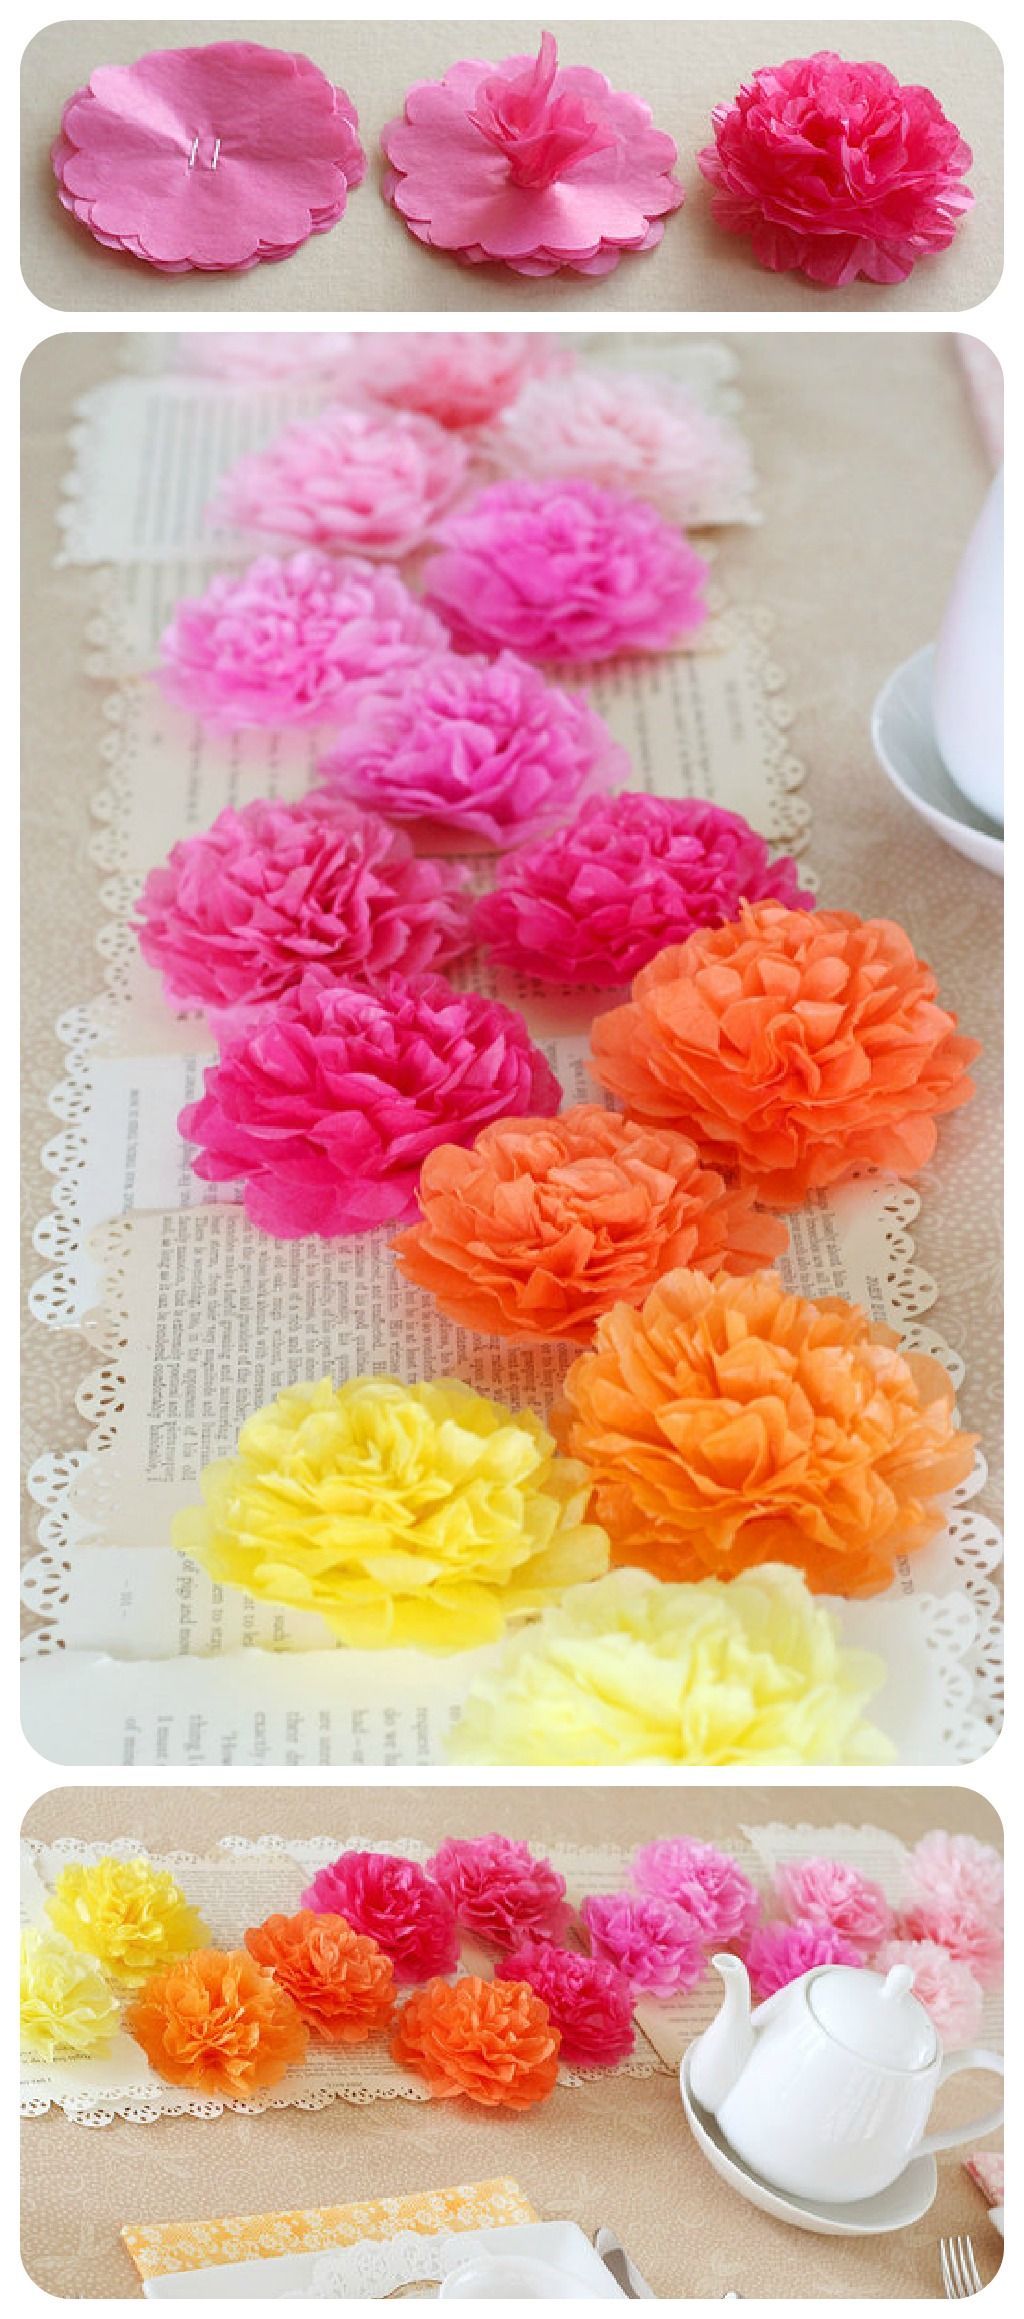 Tissue Paper Flower Runner: Use around 8 sheets of tissue paper for each flower and punched all 8 layers a